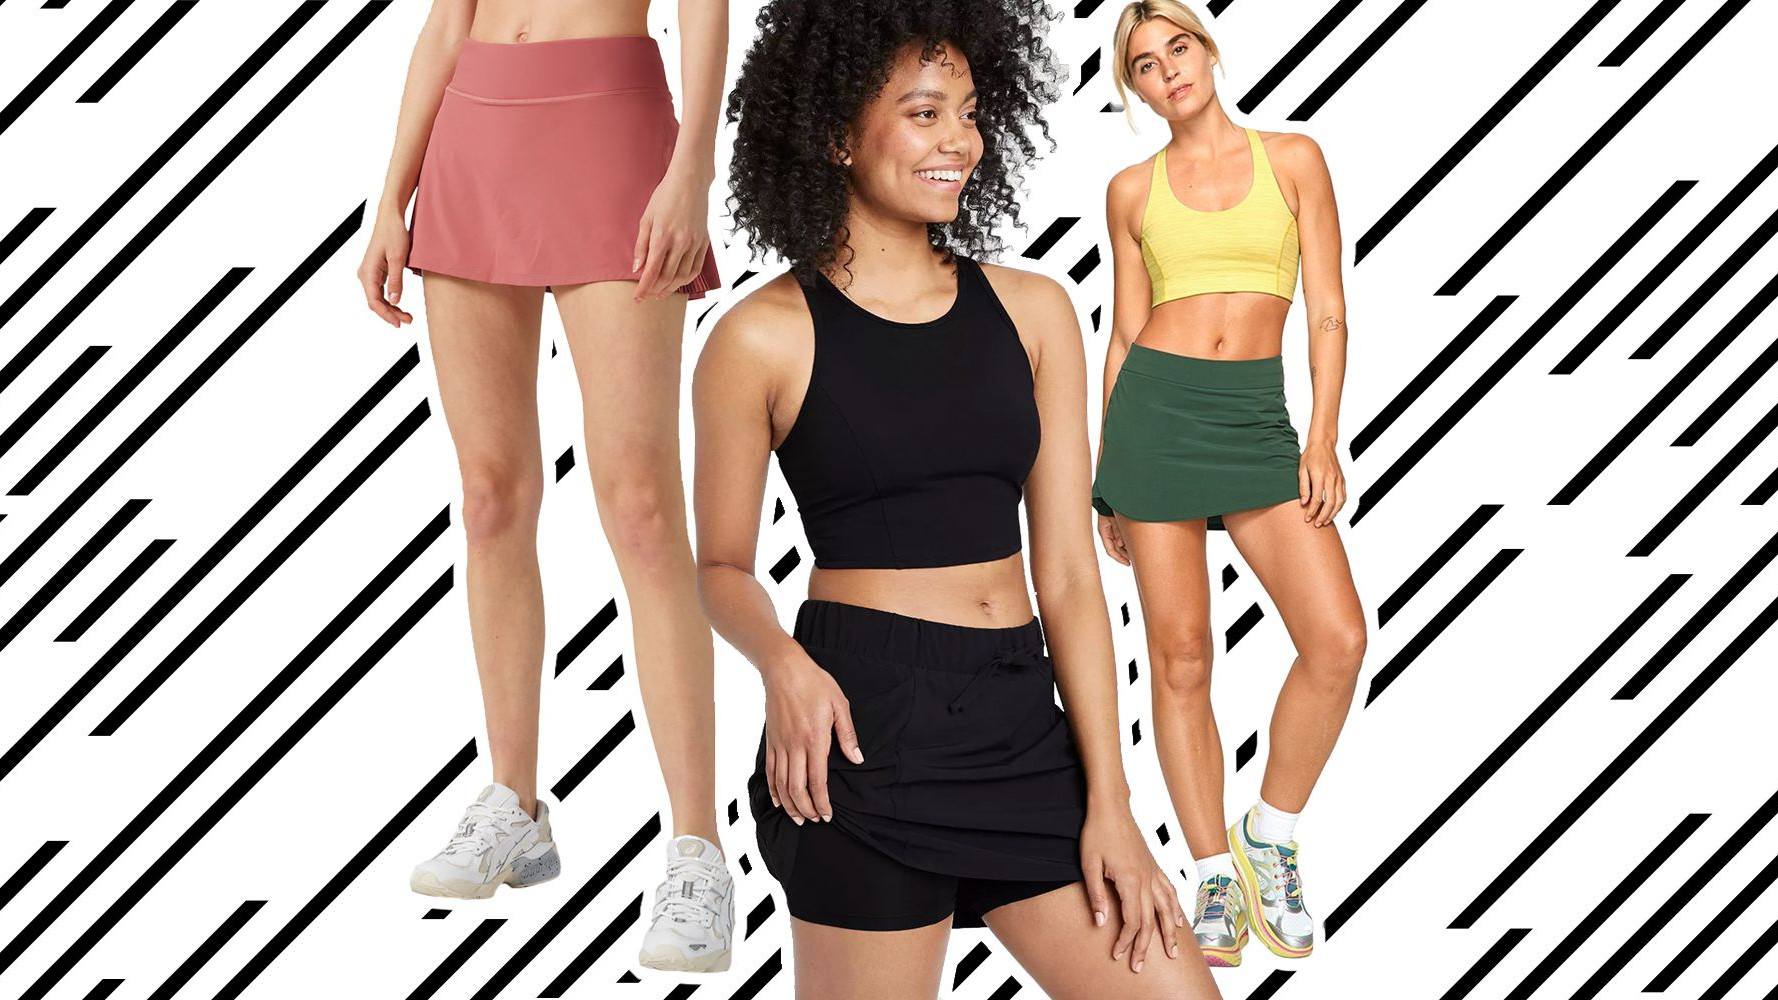 Women's Skirts, Shorts and Skorts by VENUS